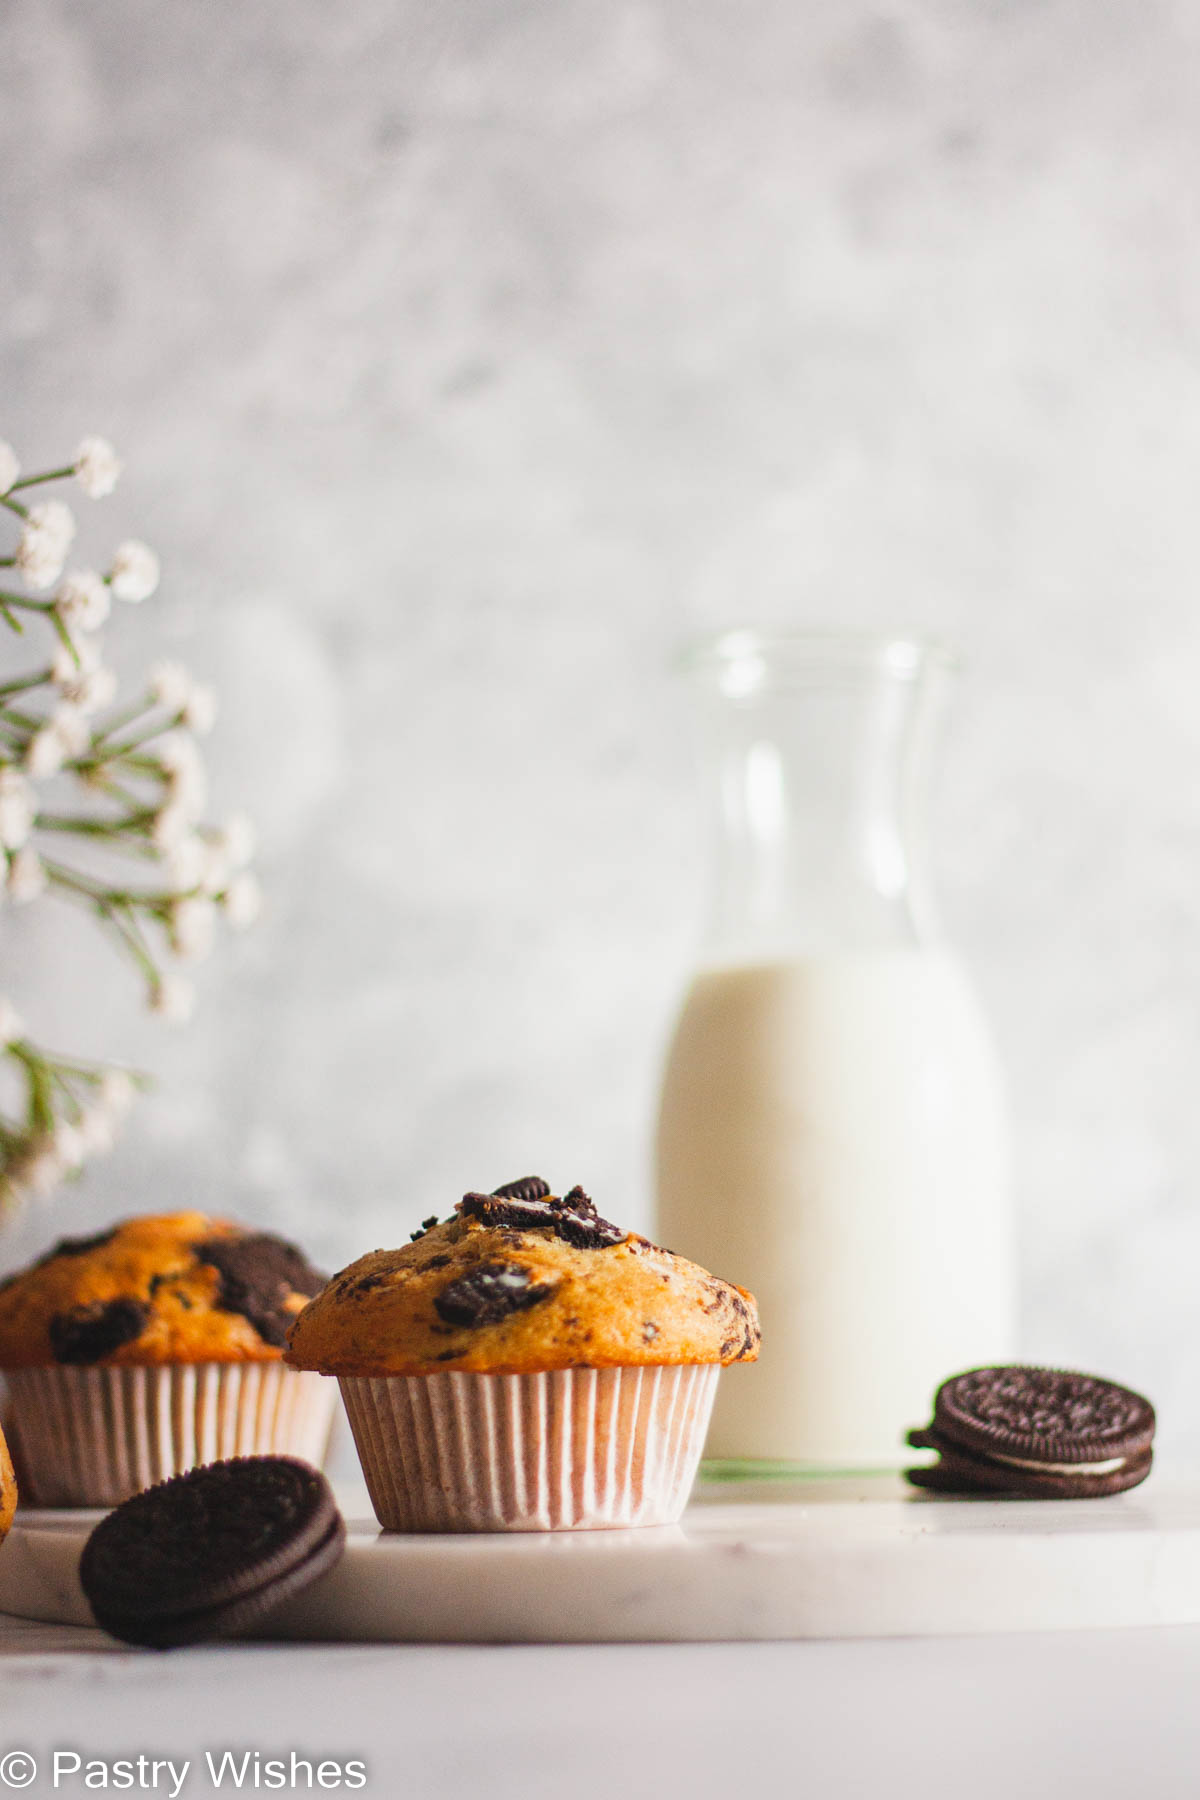 Two Oreo muffins next to white flowers, a bottle of milk and Oreo cookies.